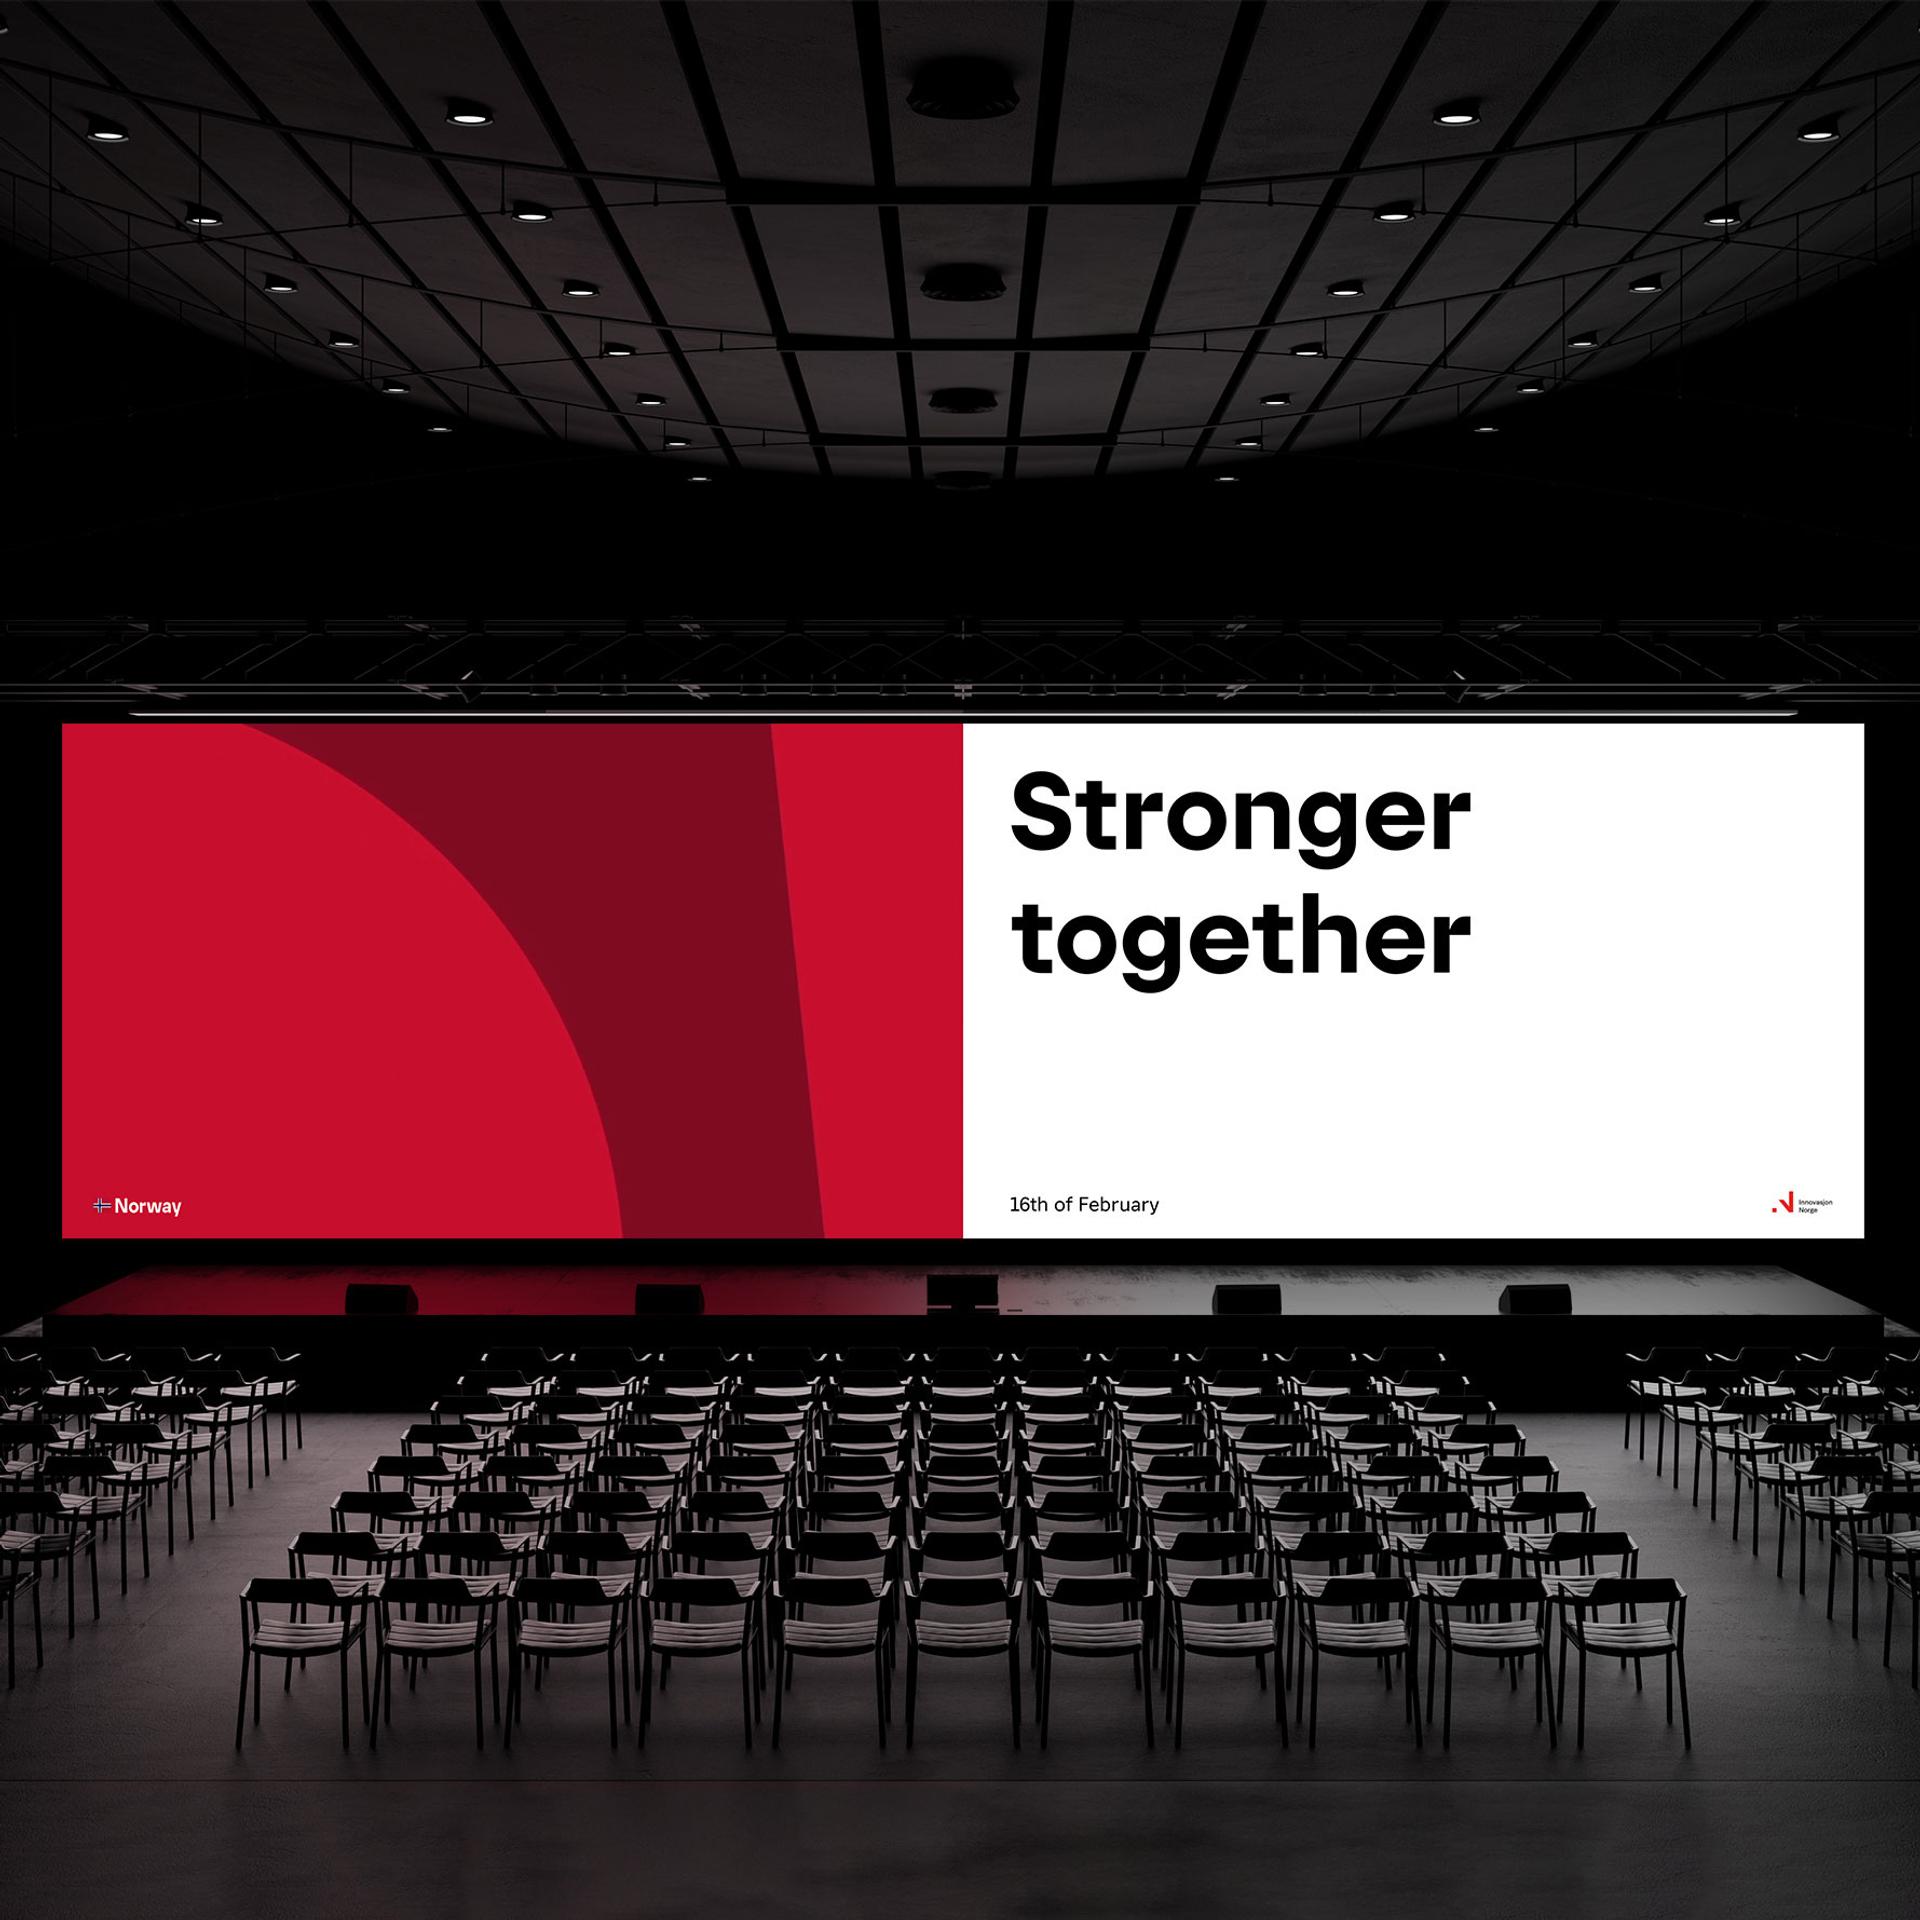 Full-size presentation of Brand Norway elements on a stage